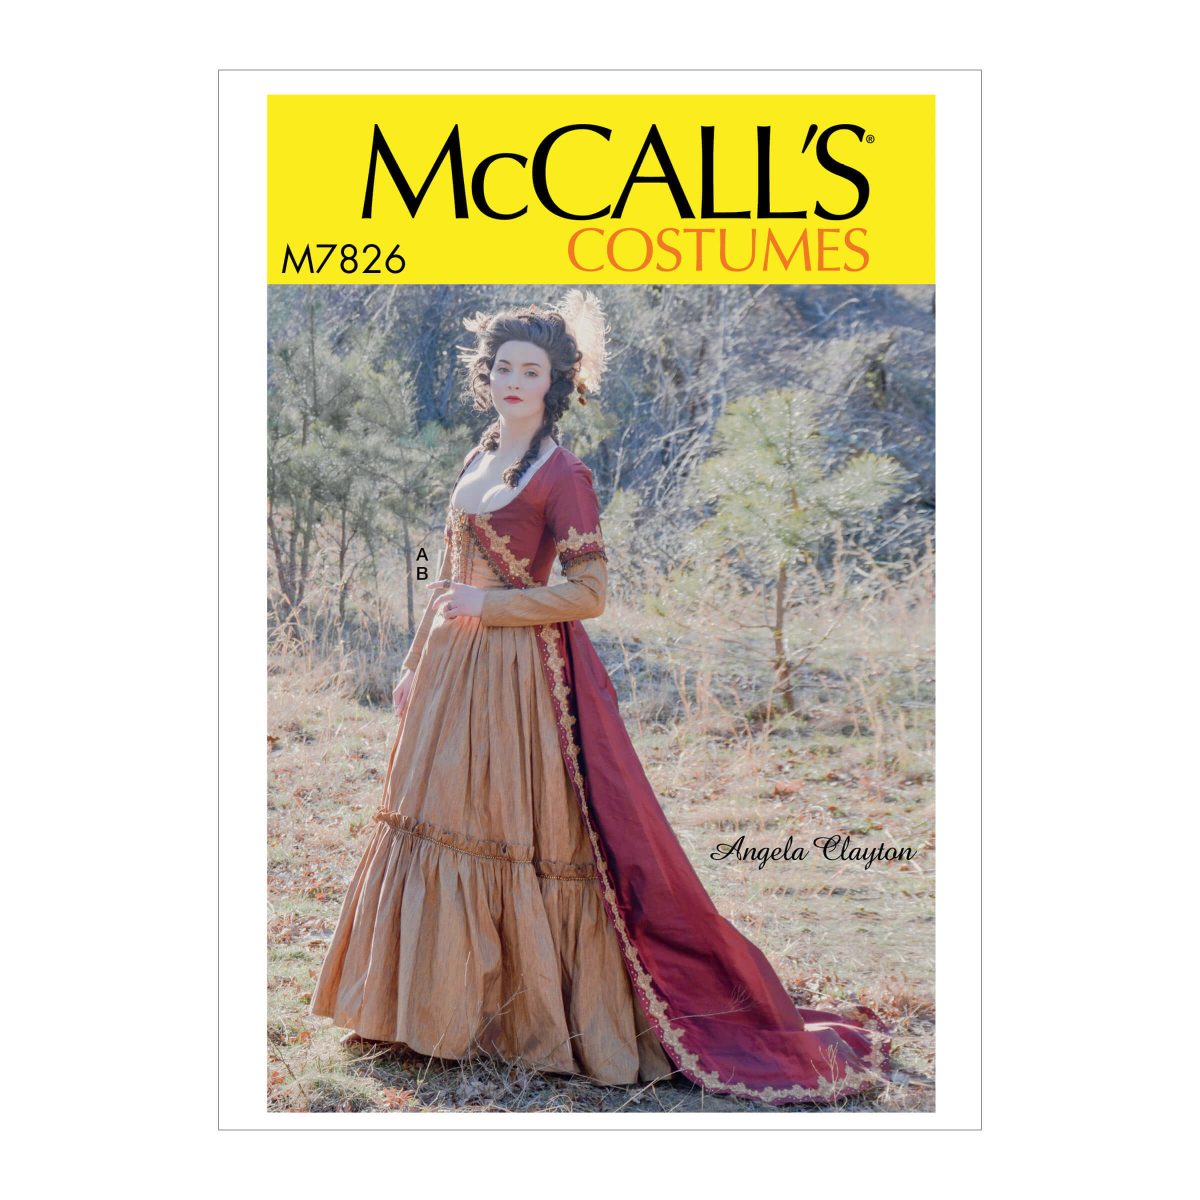 McCall's Sewing Pattern M7826 Misses' Costume by Angela Clayton